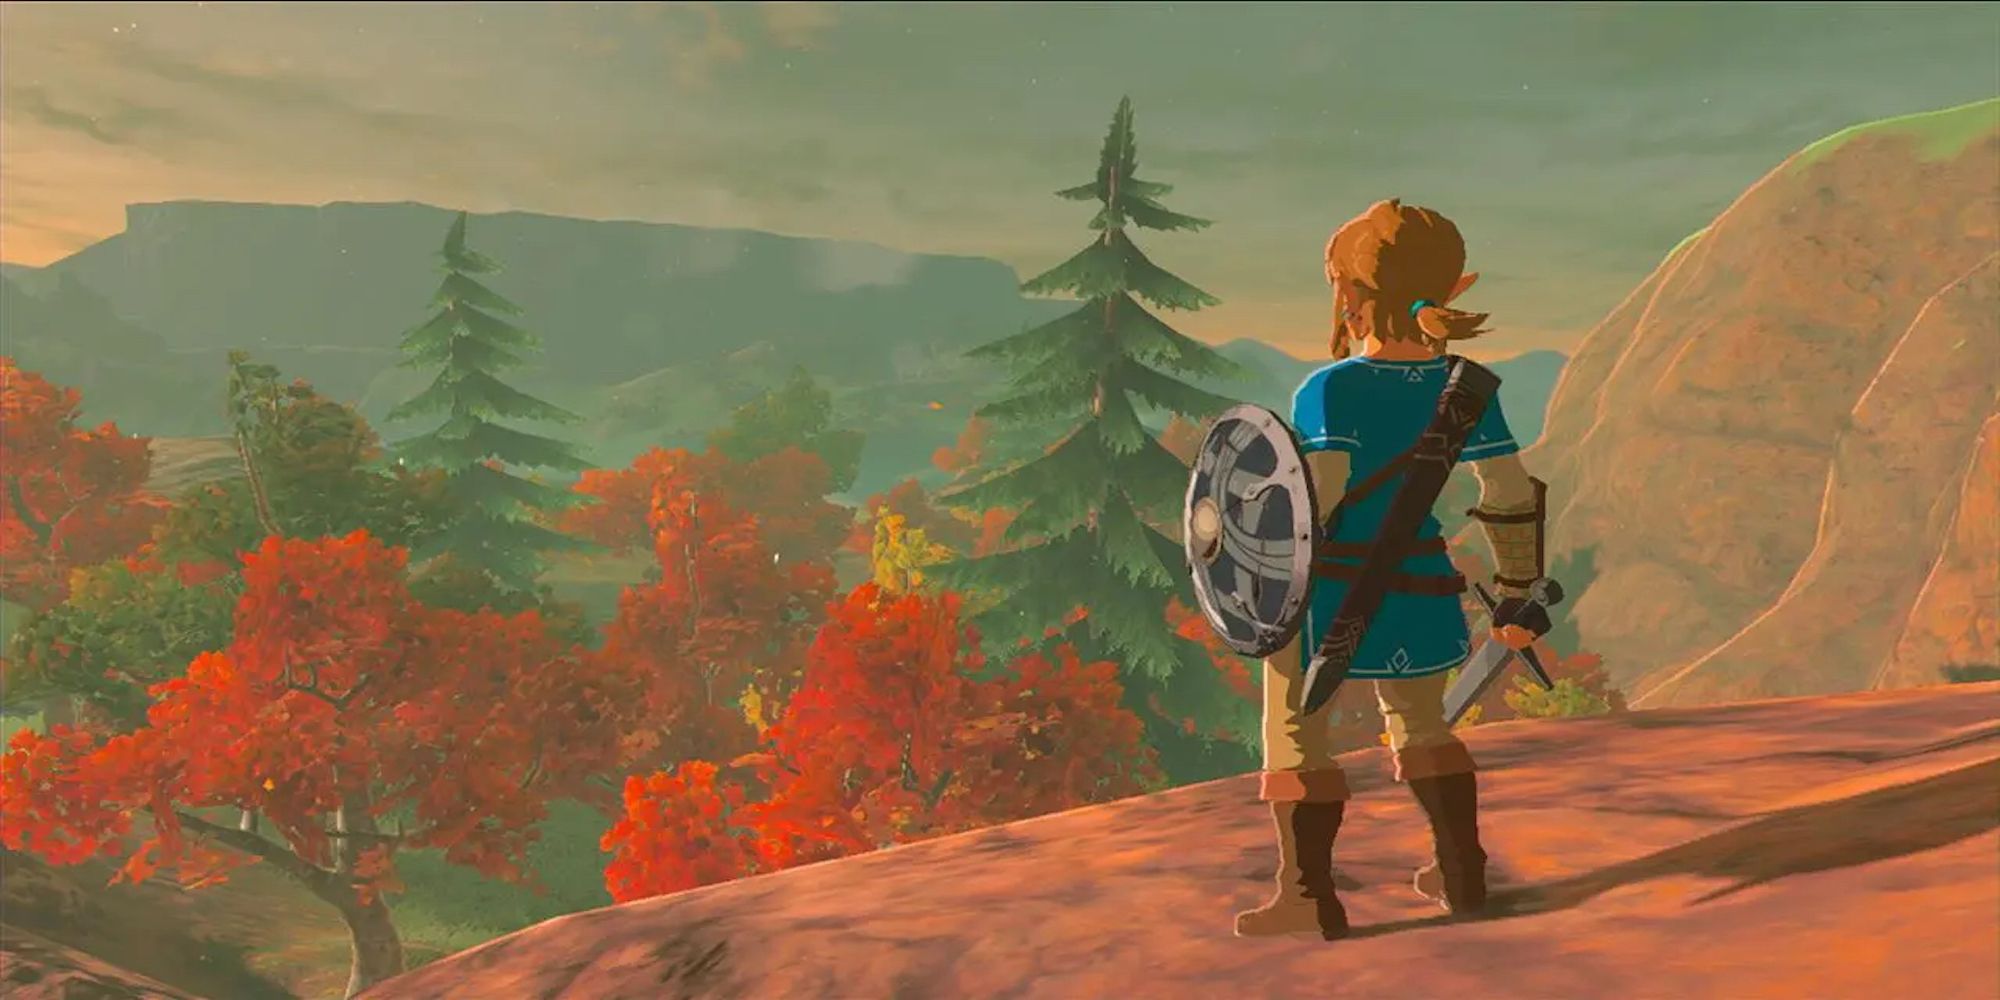 Nintendo Releases The Legend Of Zelda: Breath Of The Wild Explorer's Guide As A Free Download